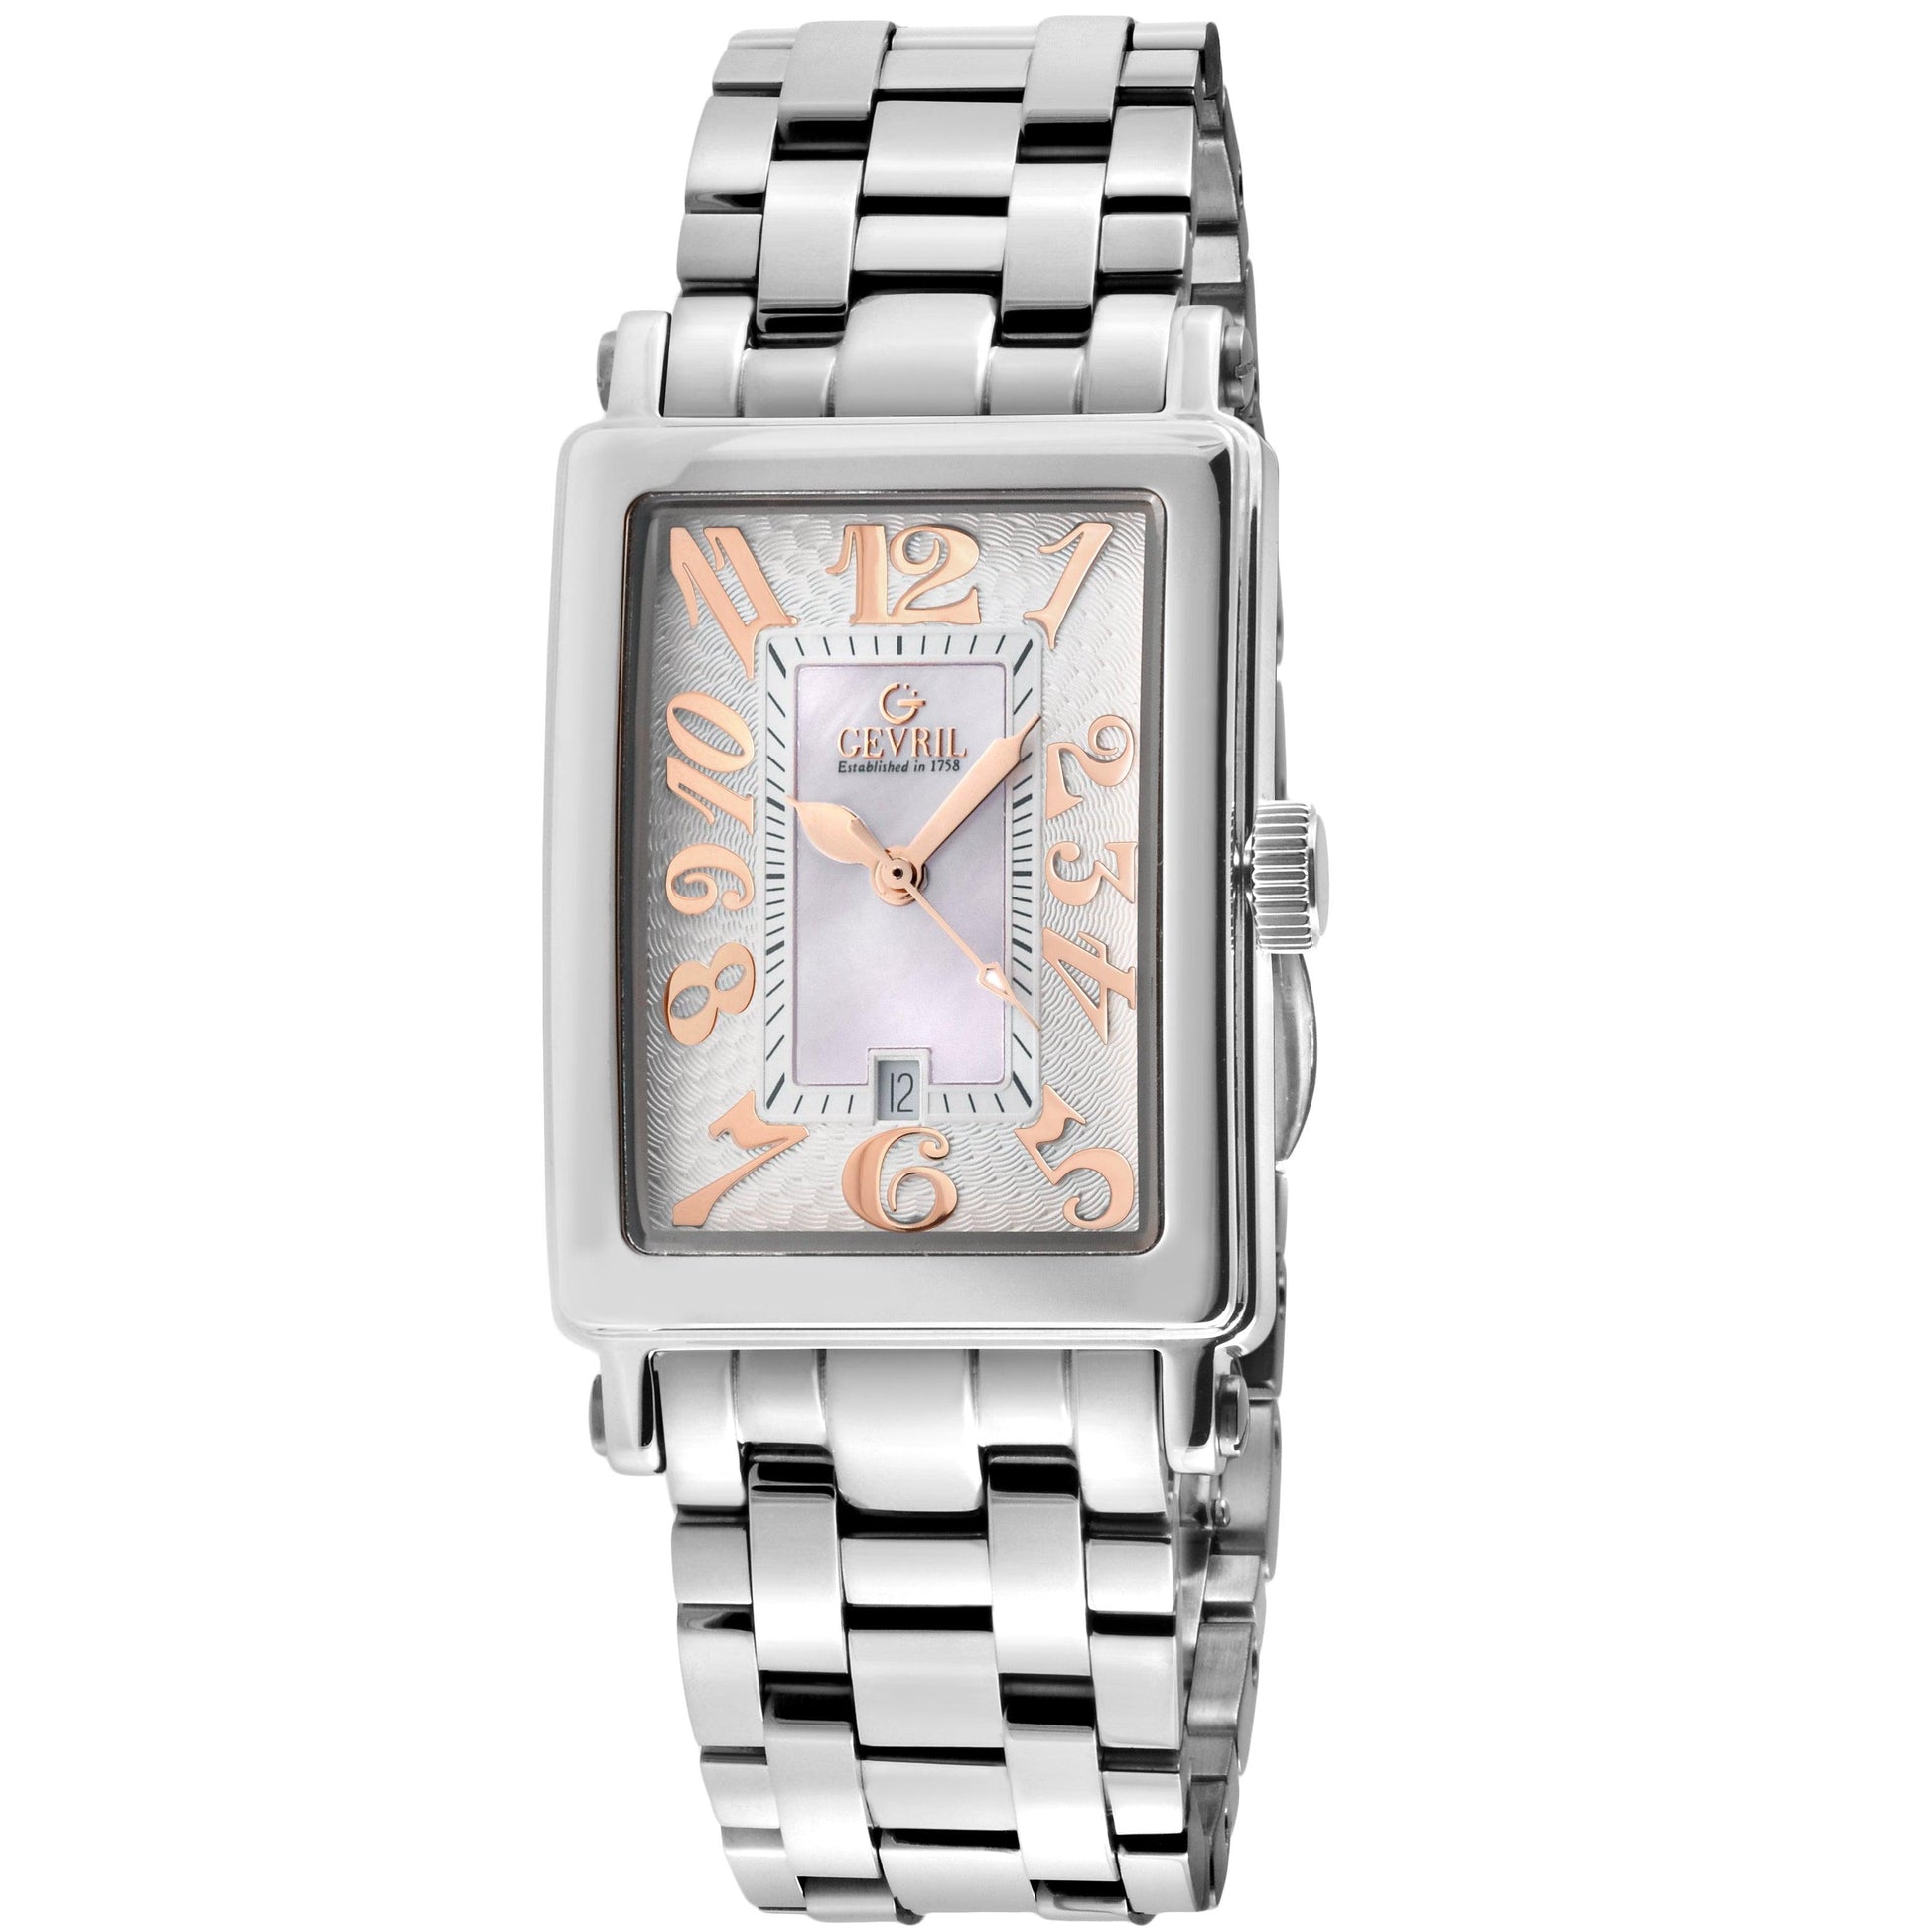 Gevril-Luxury-Swiss-Watches-Gevril Avenue of Americas Mini-7245RB